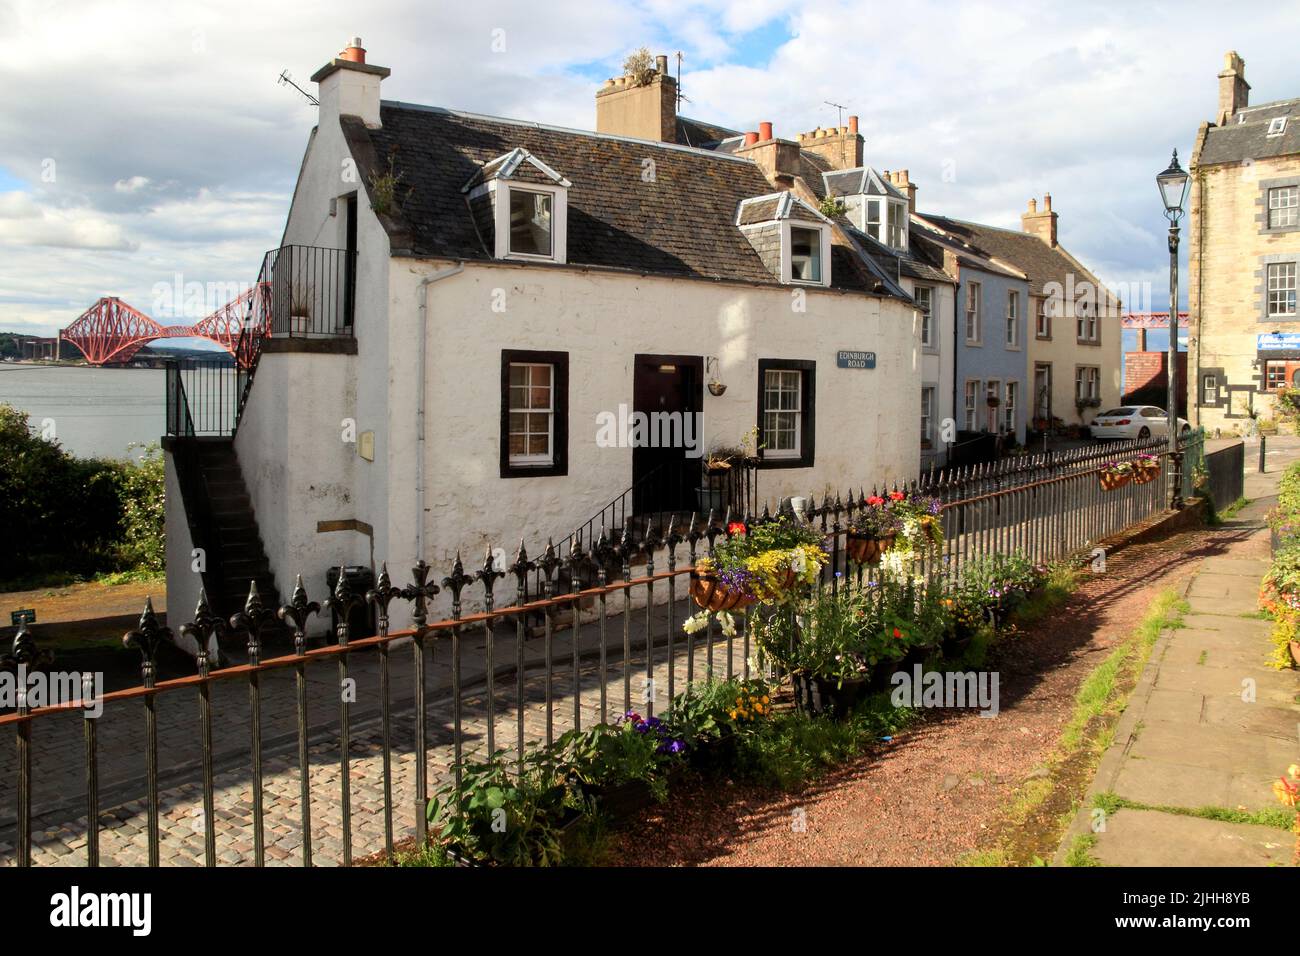 Quaint white house on a cobbled street with the Forth Bridge in the background, South Queensferry, Scotland, UK Stock Photo